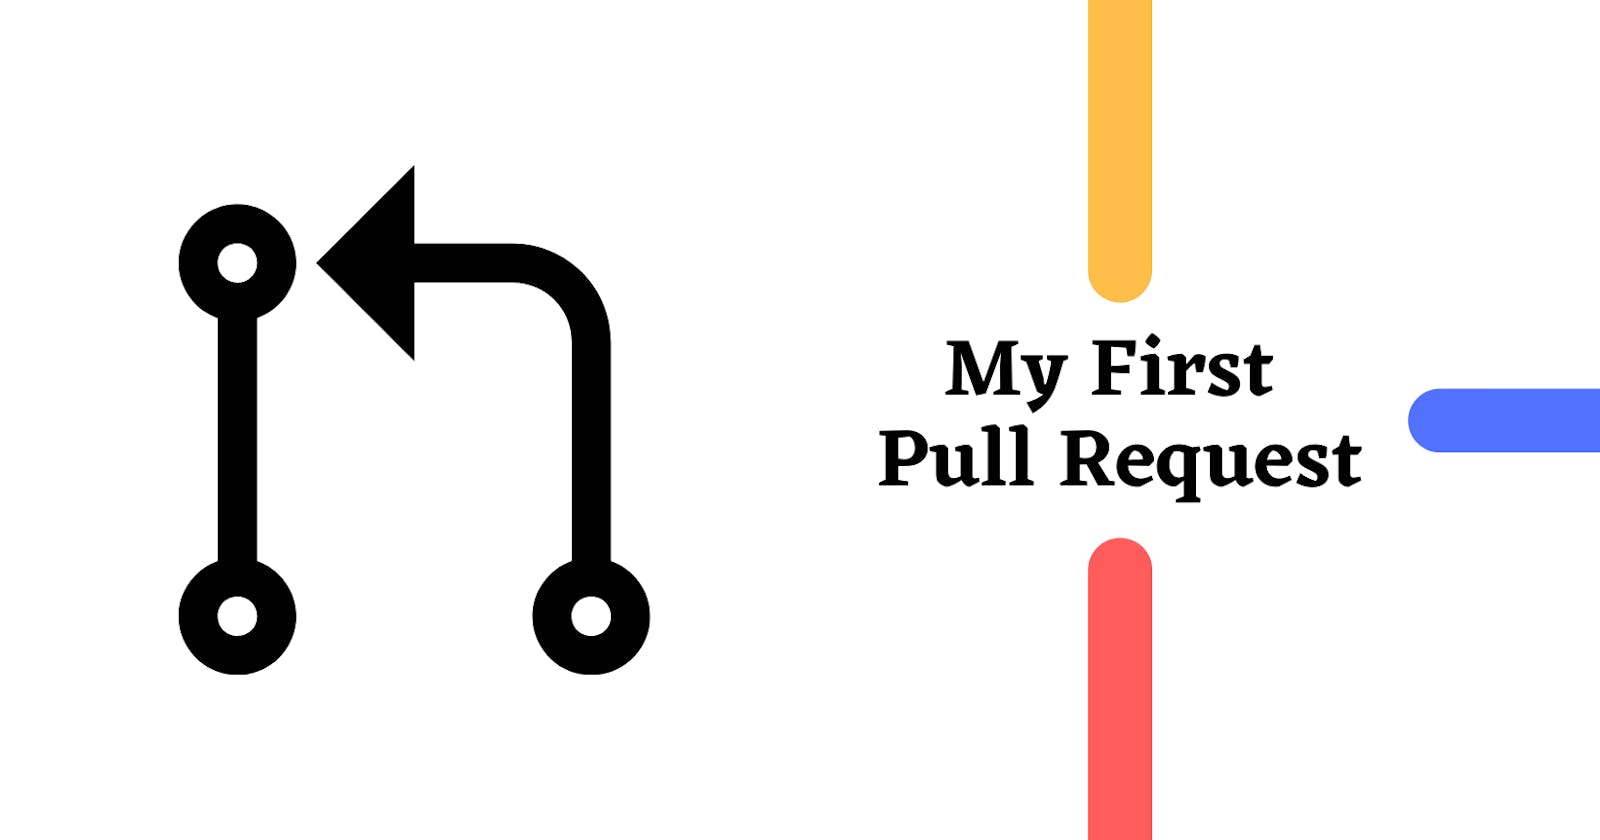 About my first Pull Request in Open-Source